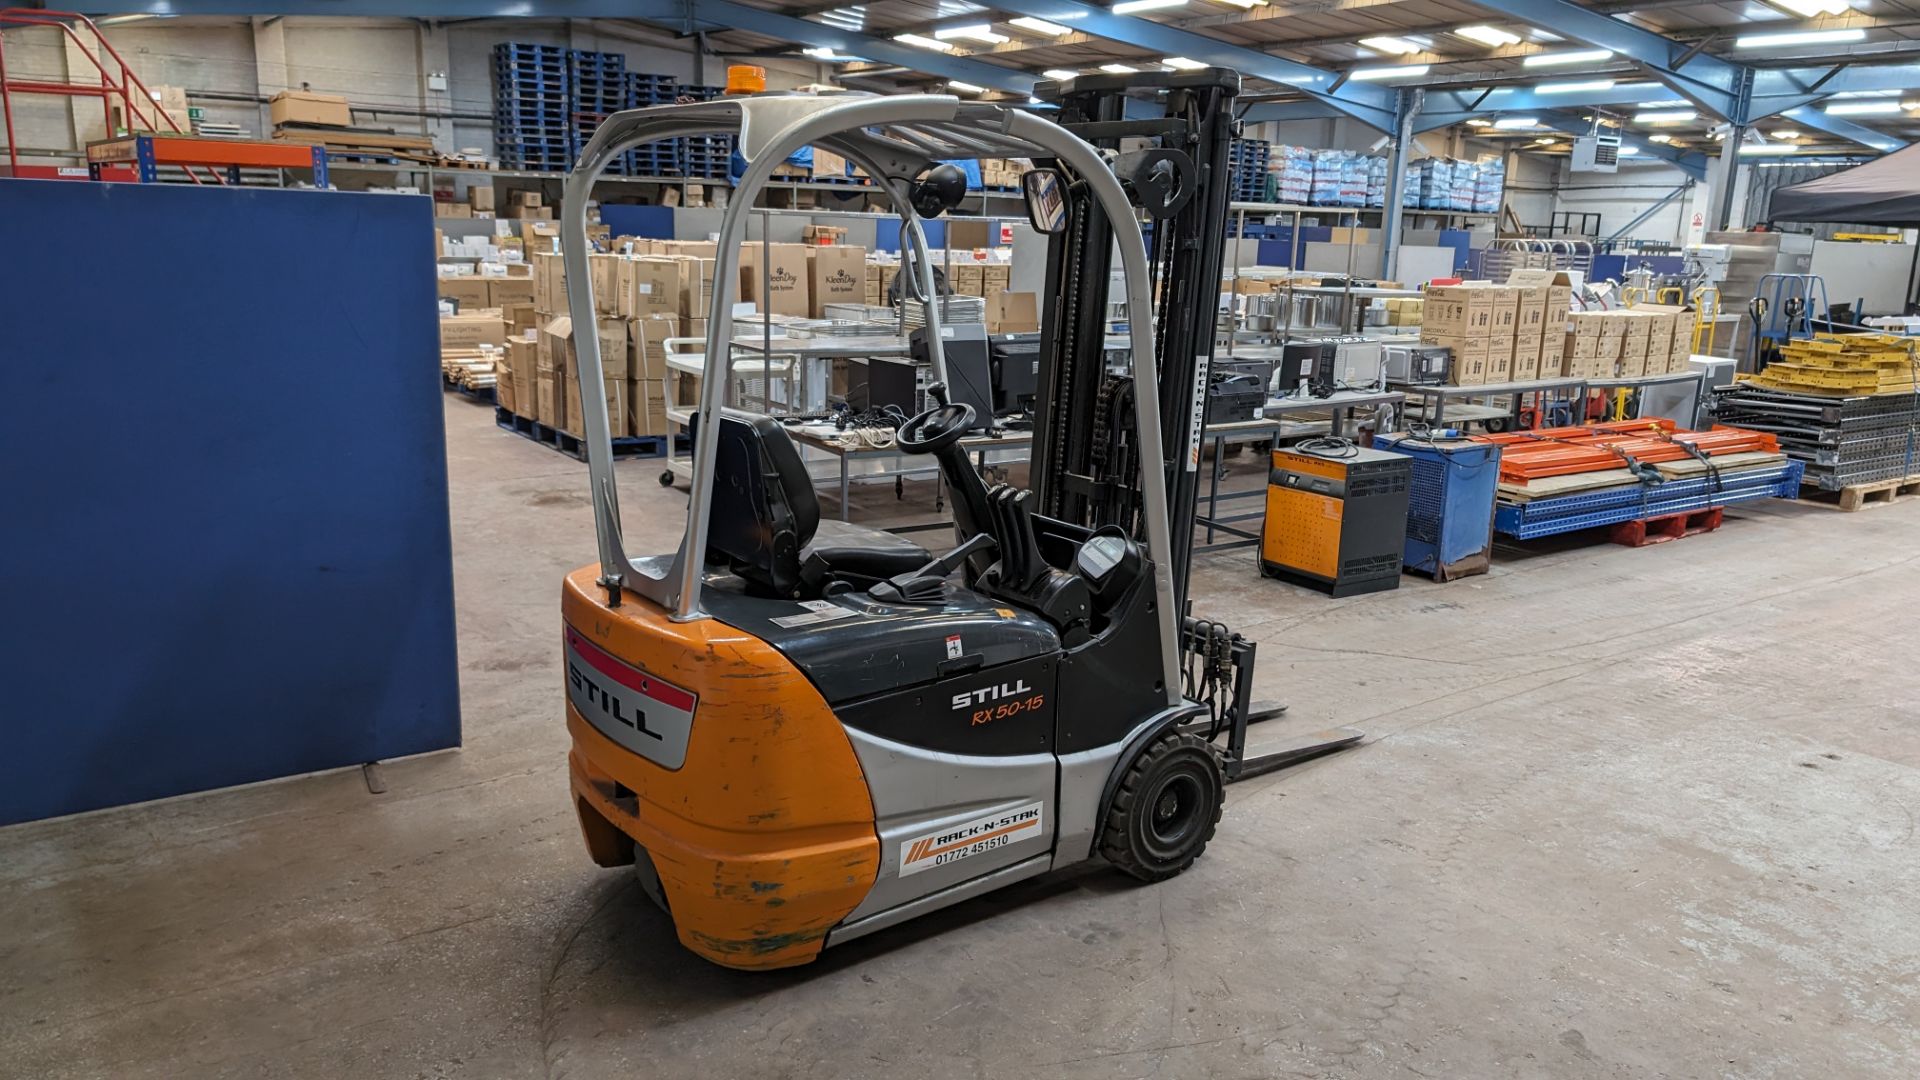 Still model RX-5015 3-wheel electric forklift truck with sideshift, 1.5 tonne capacity, including St - Image 15 of 18